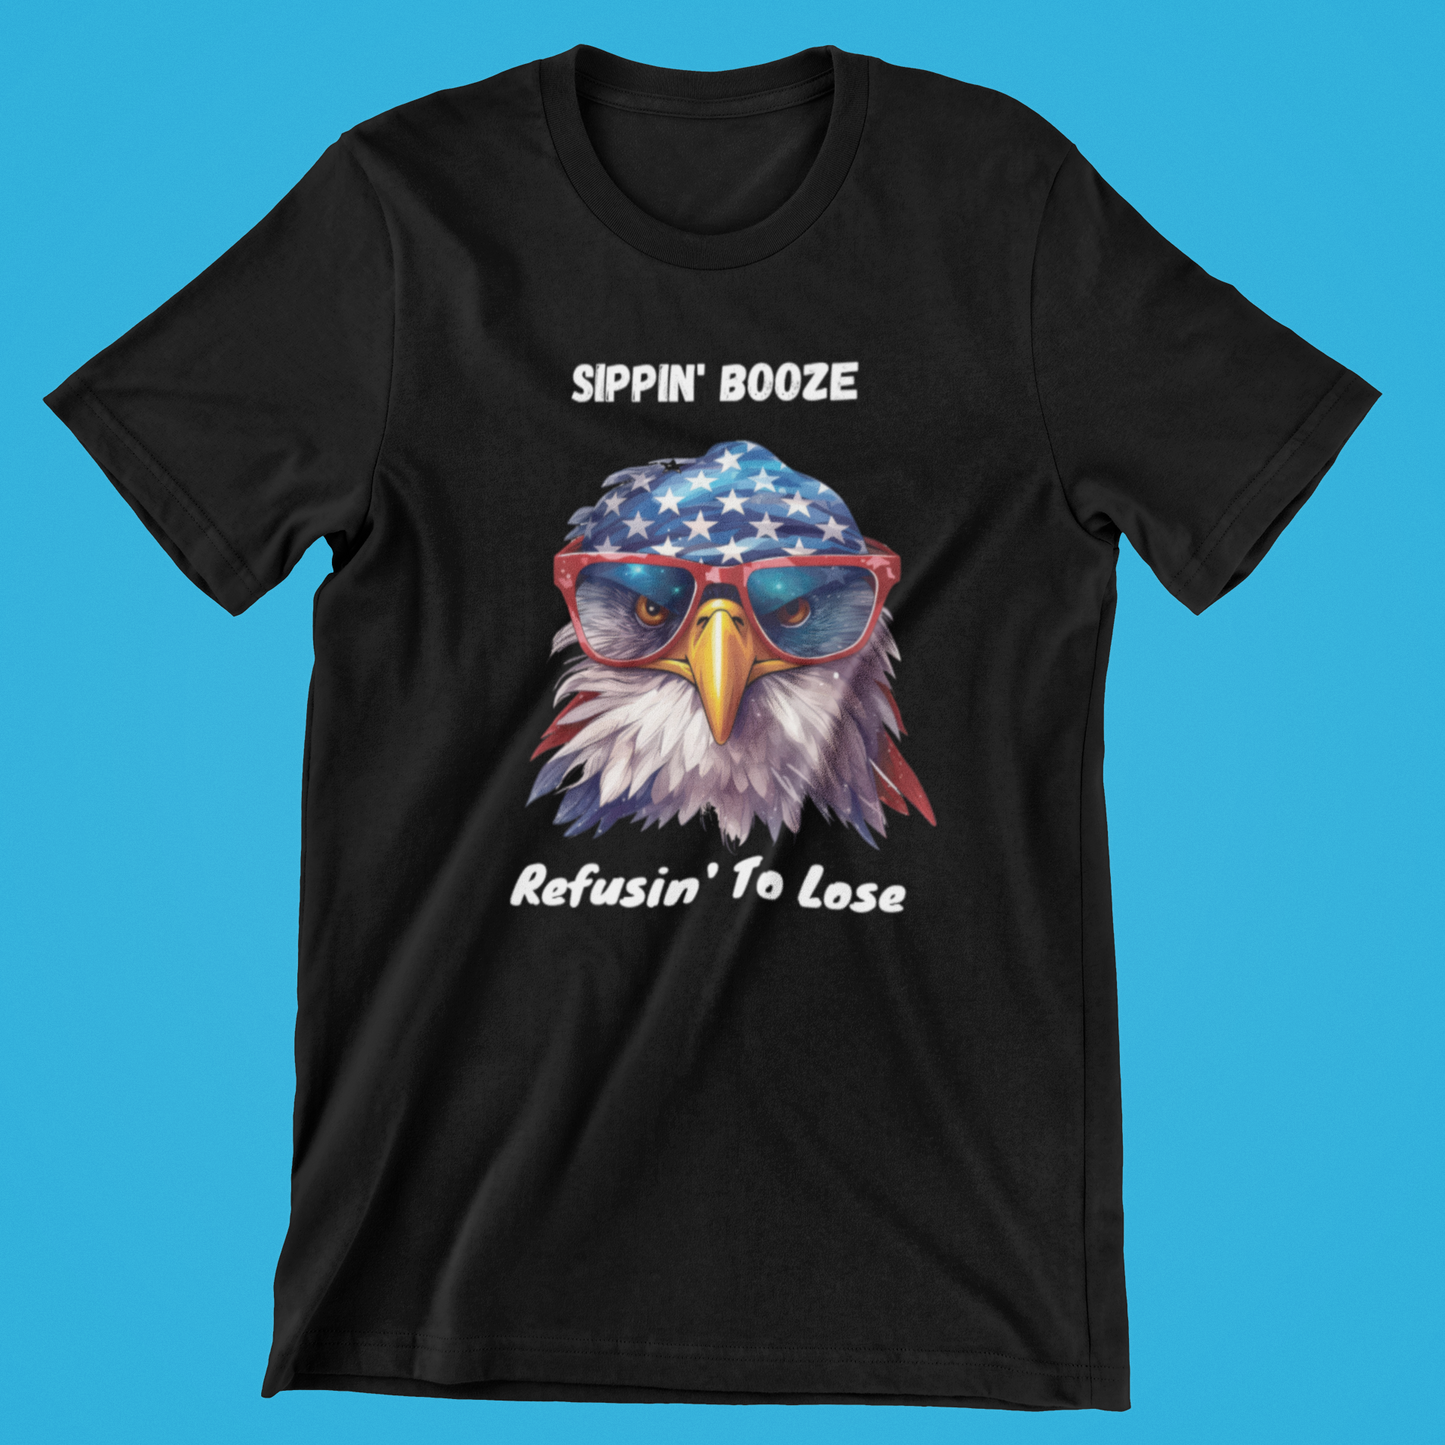 Sippin' Booze Refusin' To Lose Shirt